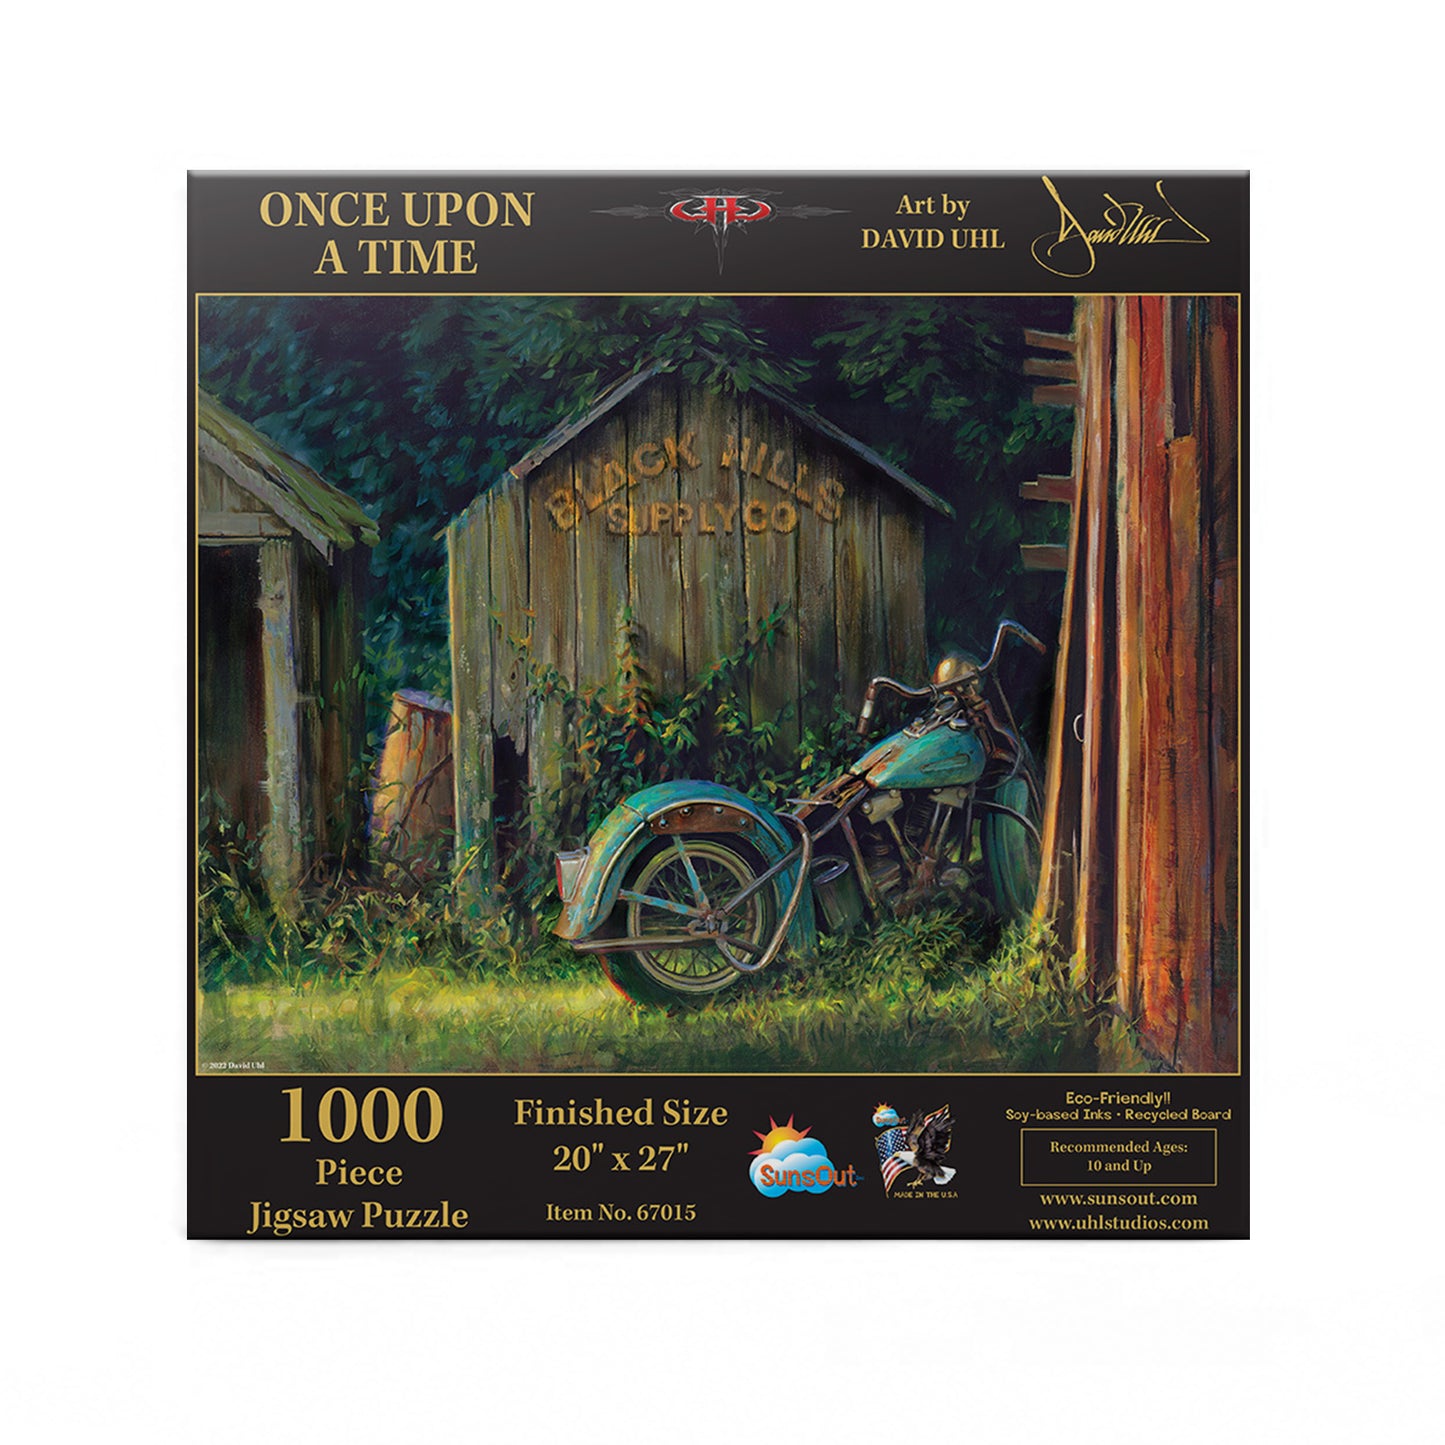 Once Upon A Time by David Uhl, 1000 Piece Puzzle